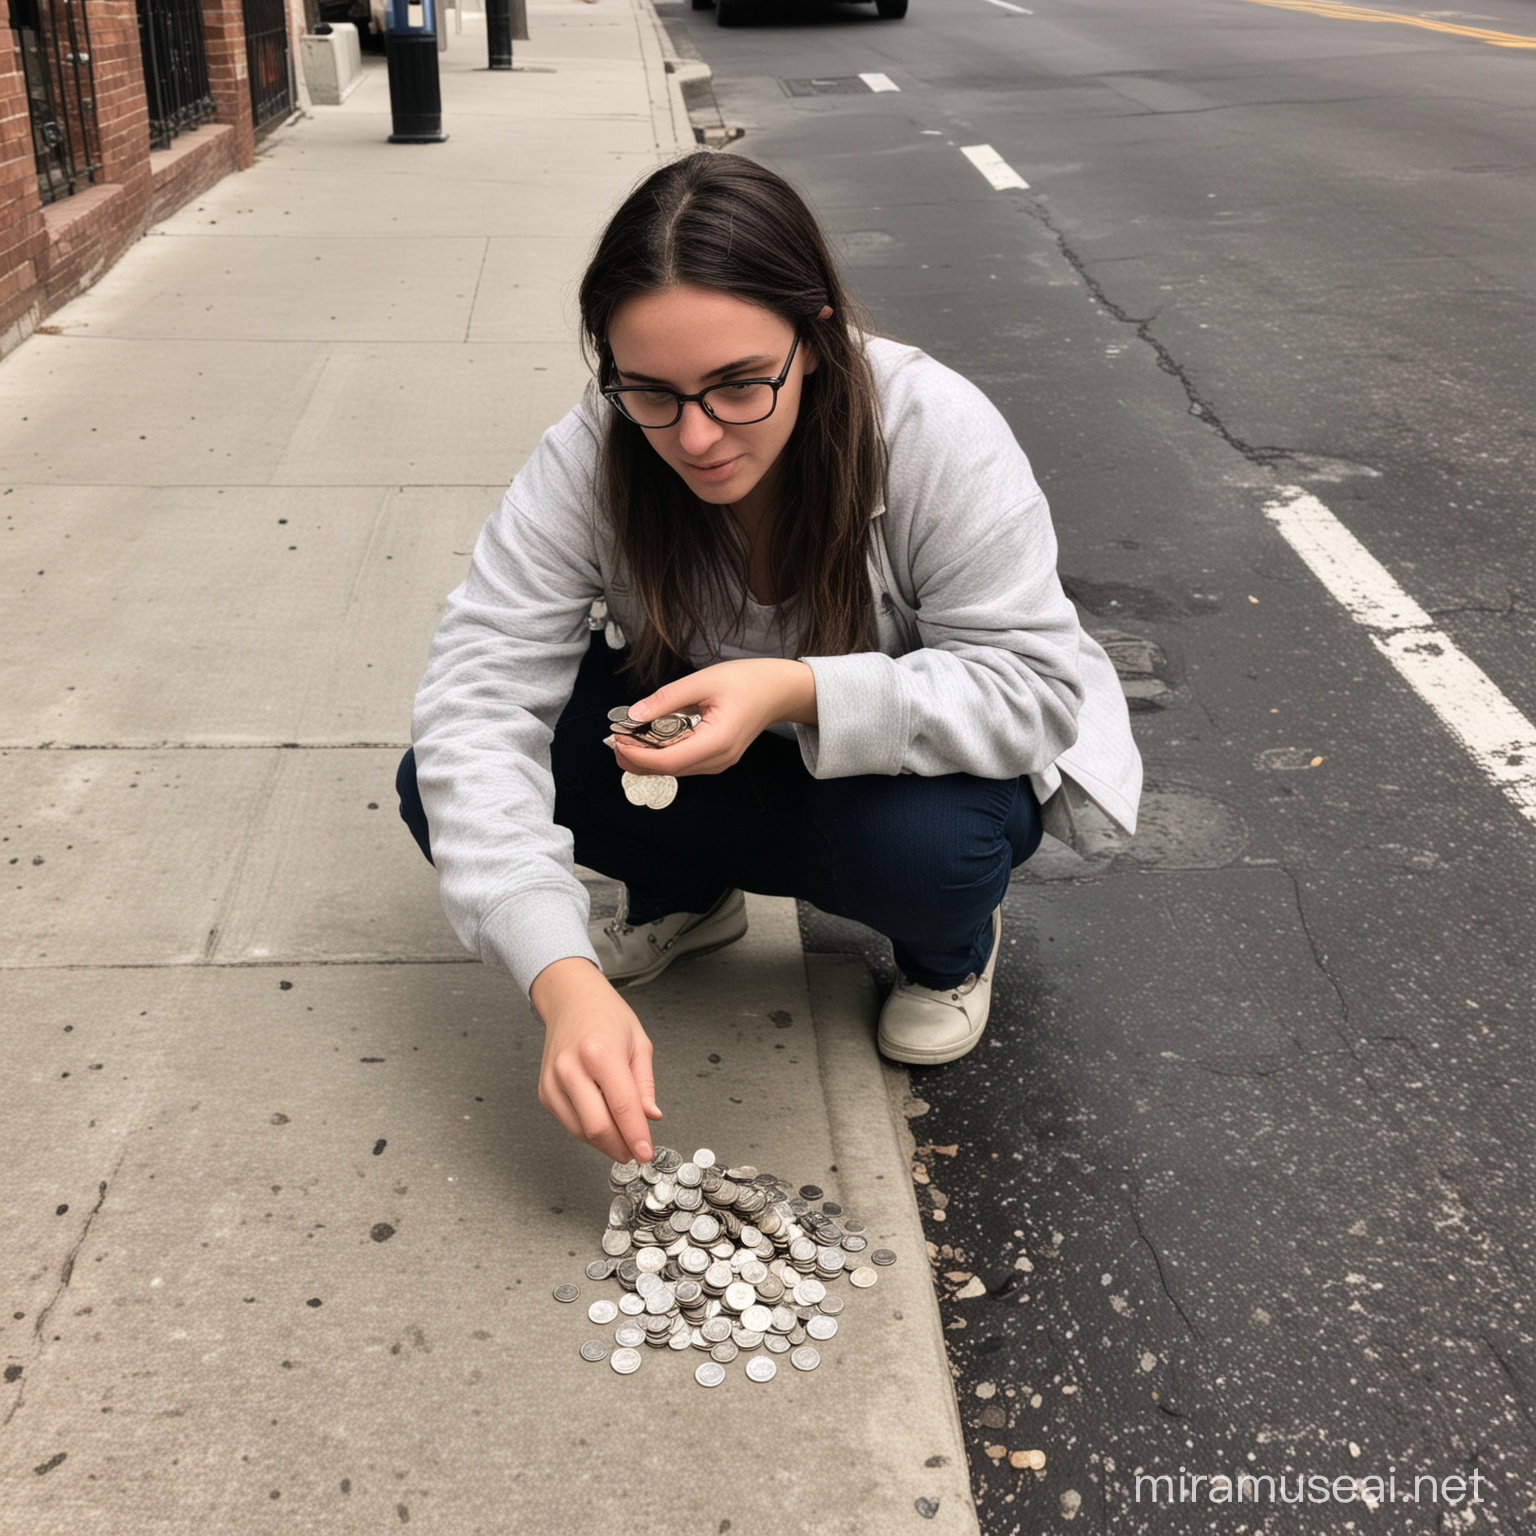 Young Person Collecting Coins on Urban Sidewalk